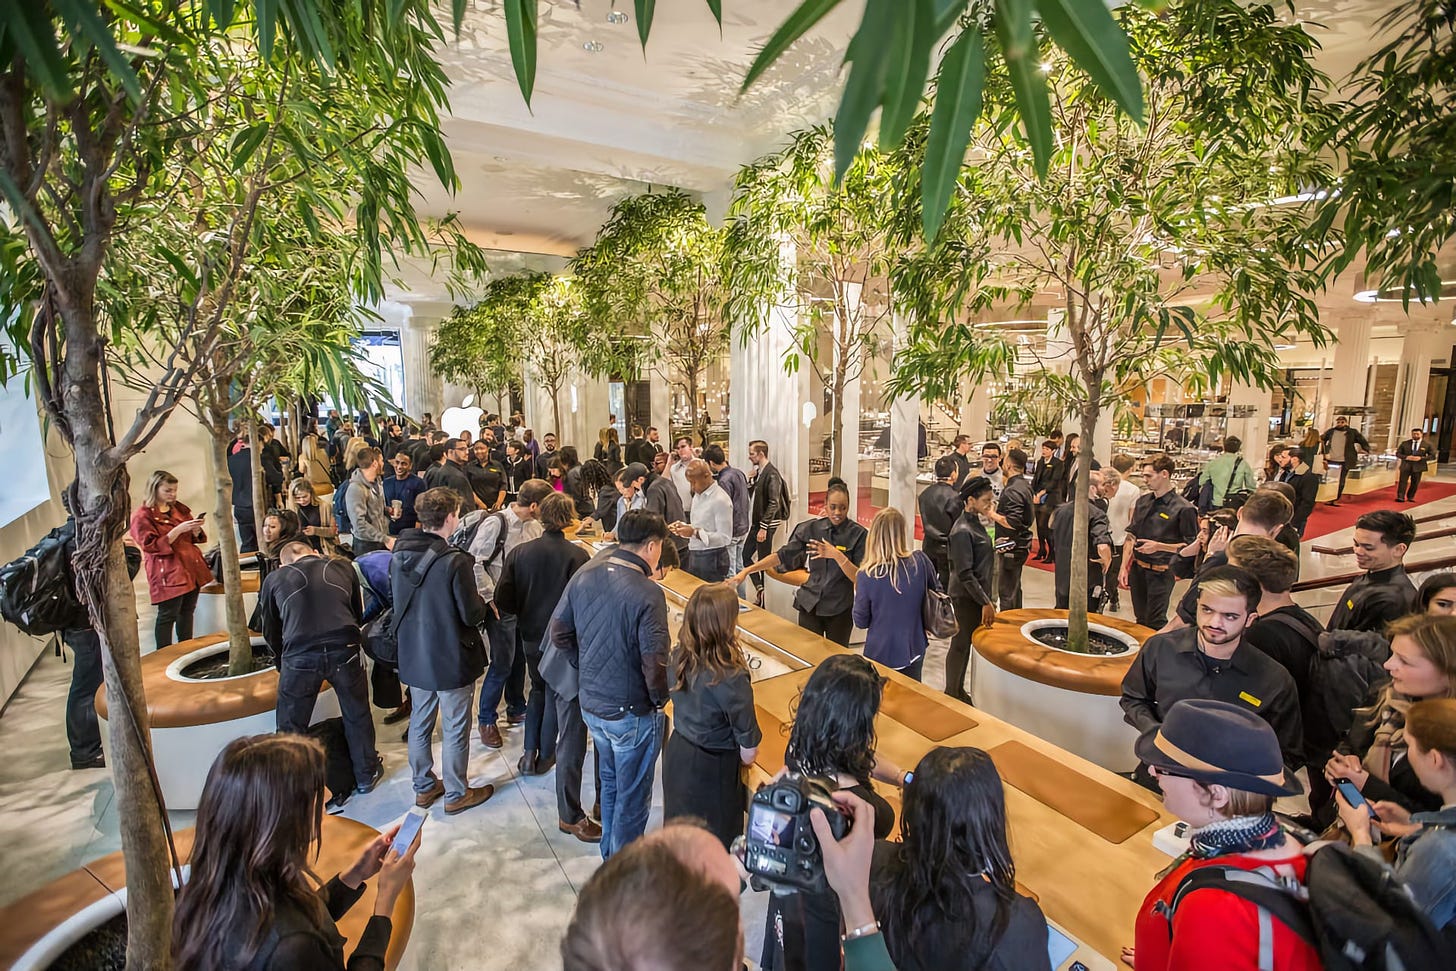 Apple Watch at Selfridges pictured full of customers. Trees line a long table in the center of the room.